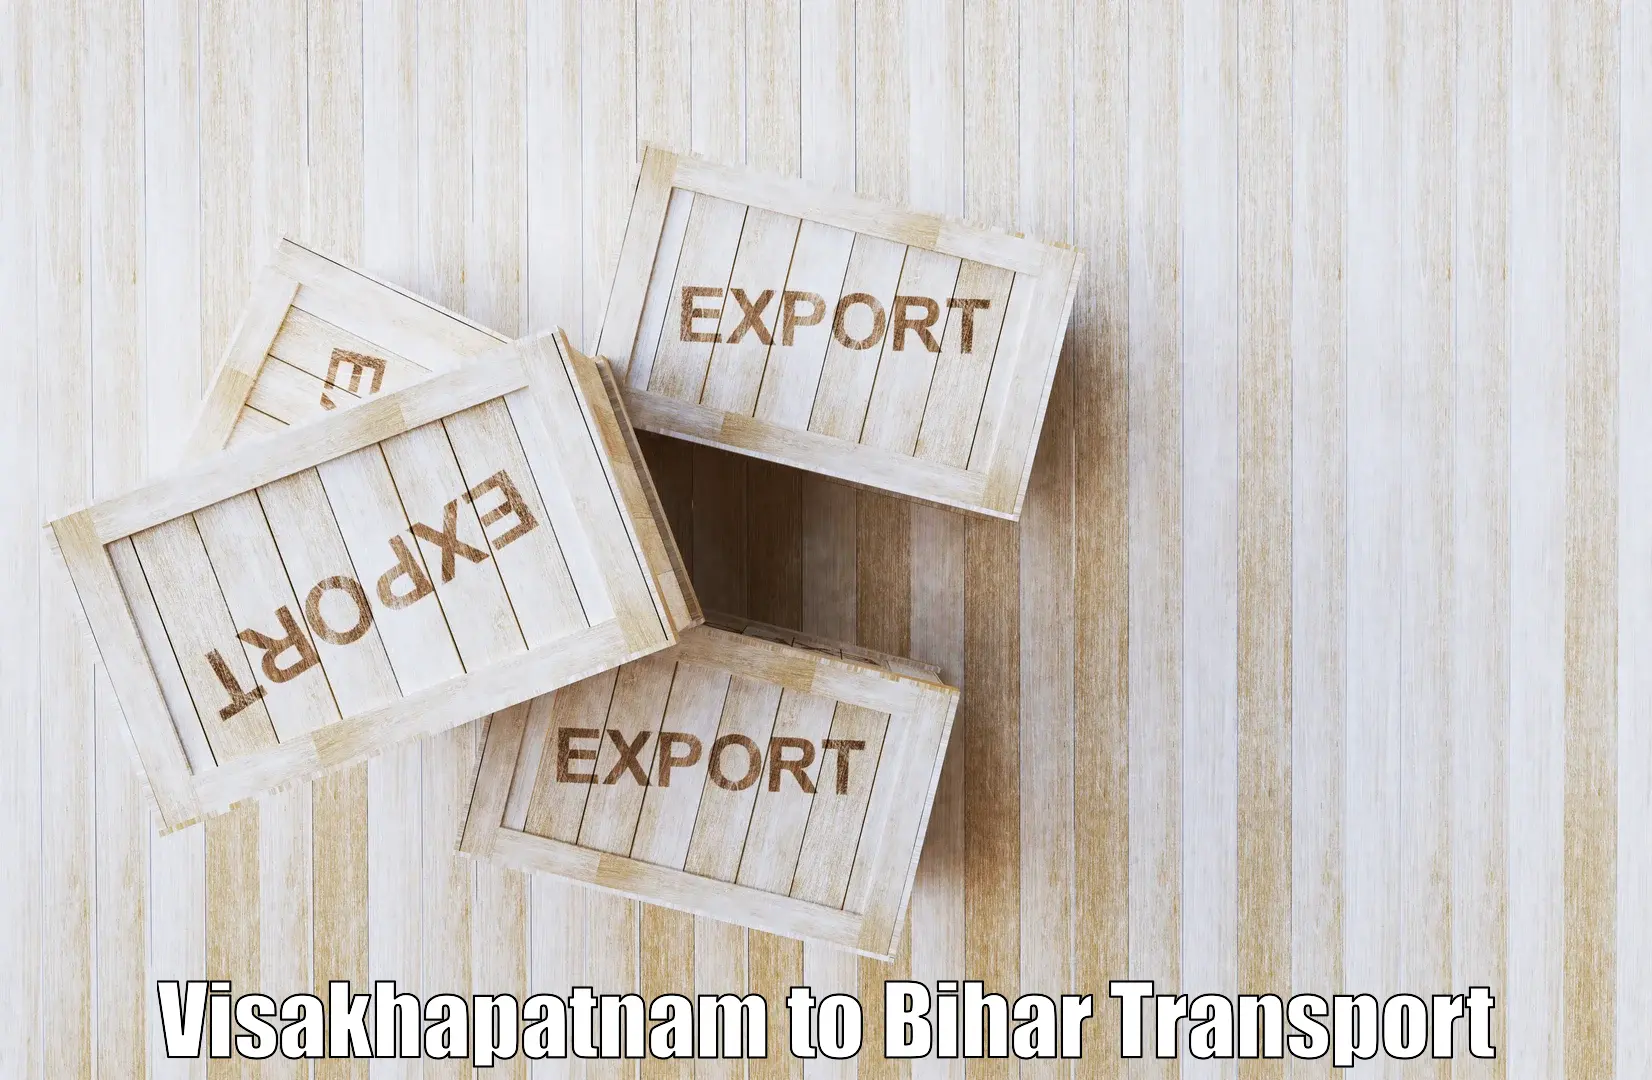 Transport shared services in Visakhapatnam to Bihar